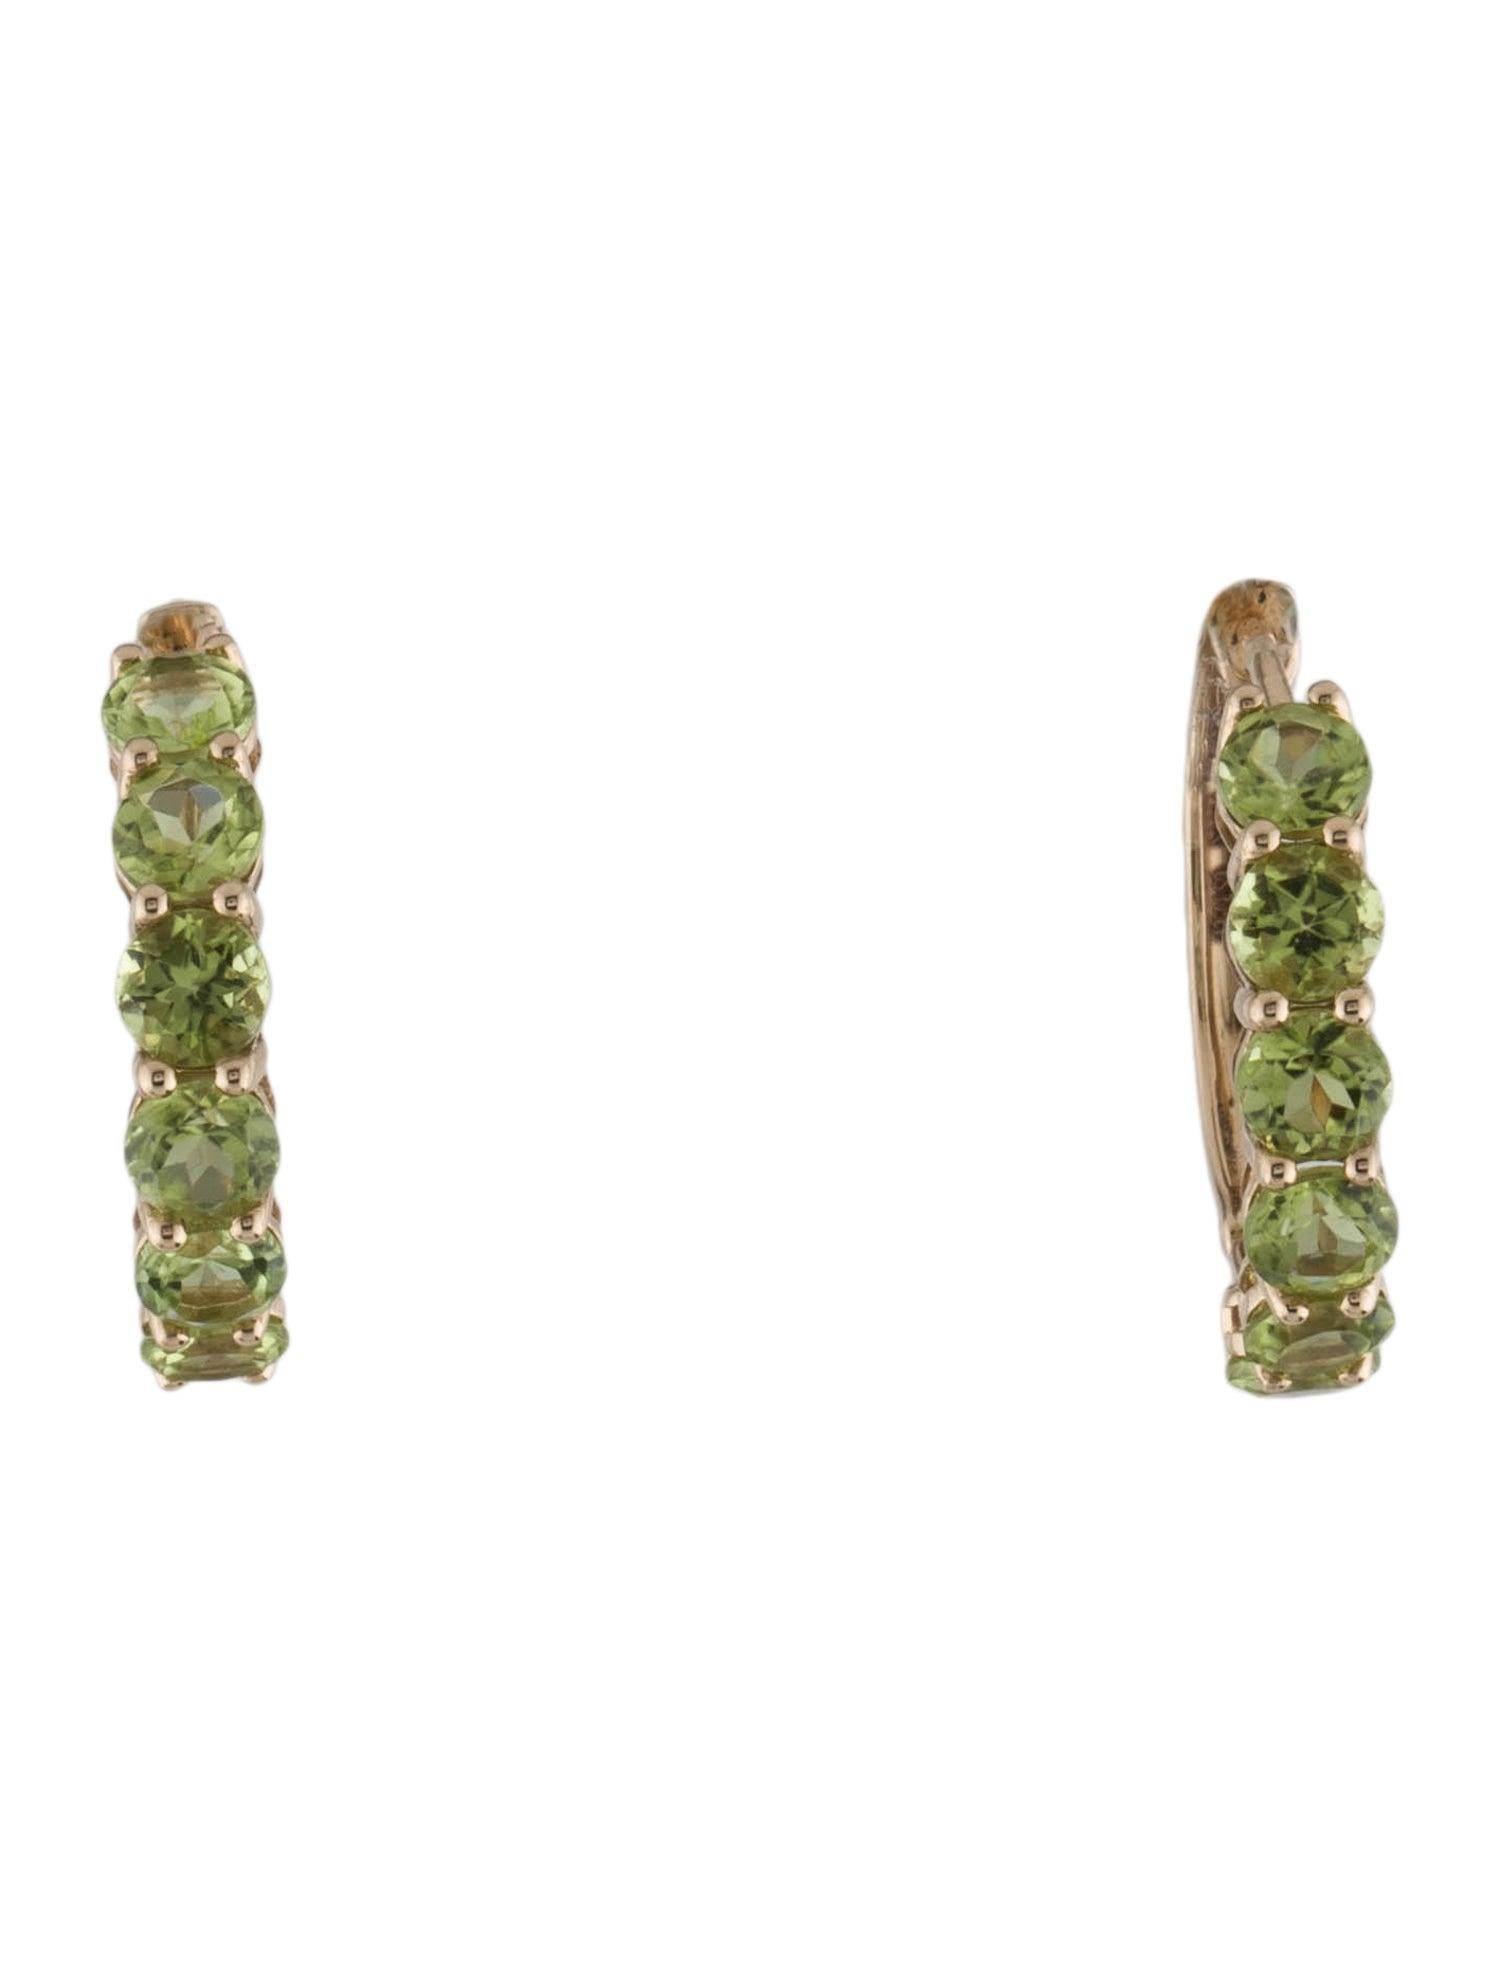 Indulge in the enchanting allure of our Harmony in Green Peridot Earrings from the house of Jeweltique. Immerse yourself in the soothing embrace of nature with these meticulously crafted earrings, a true celebration of the refreshing qualities that